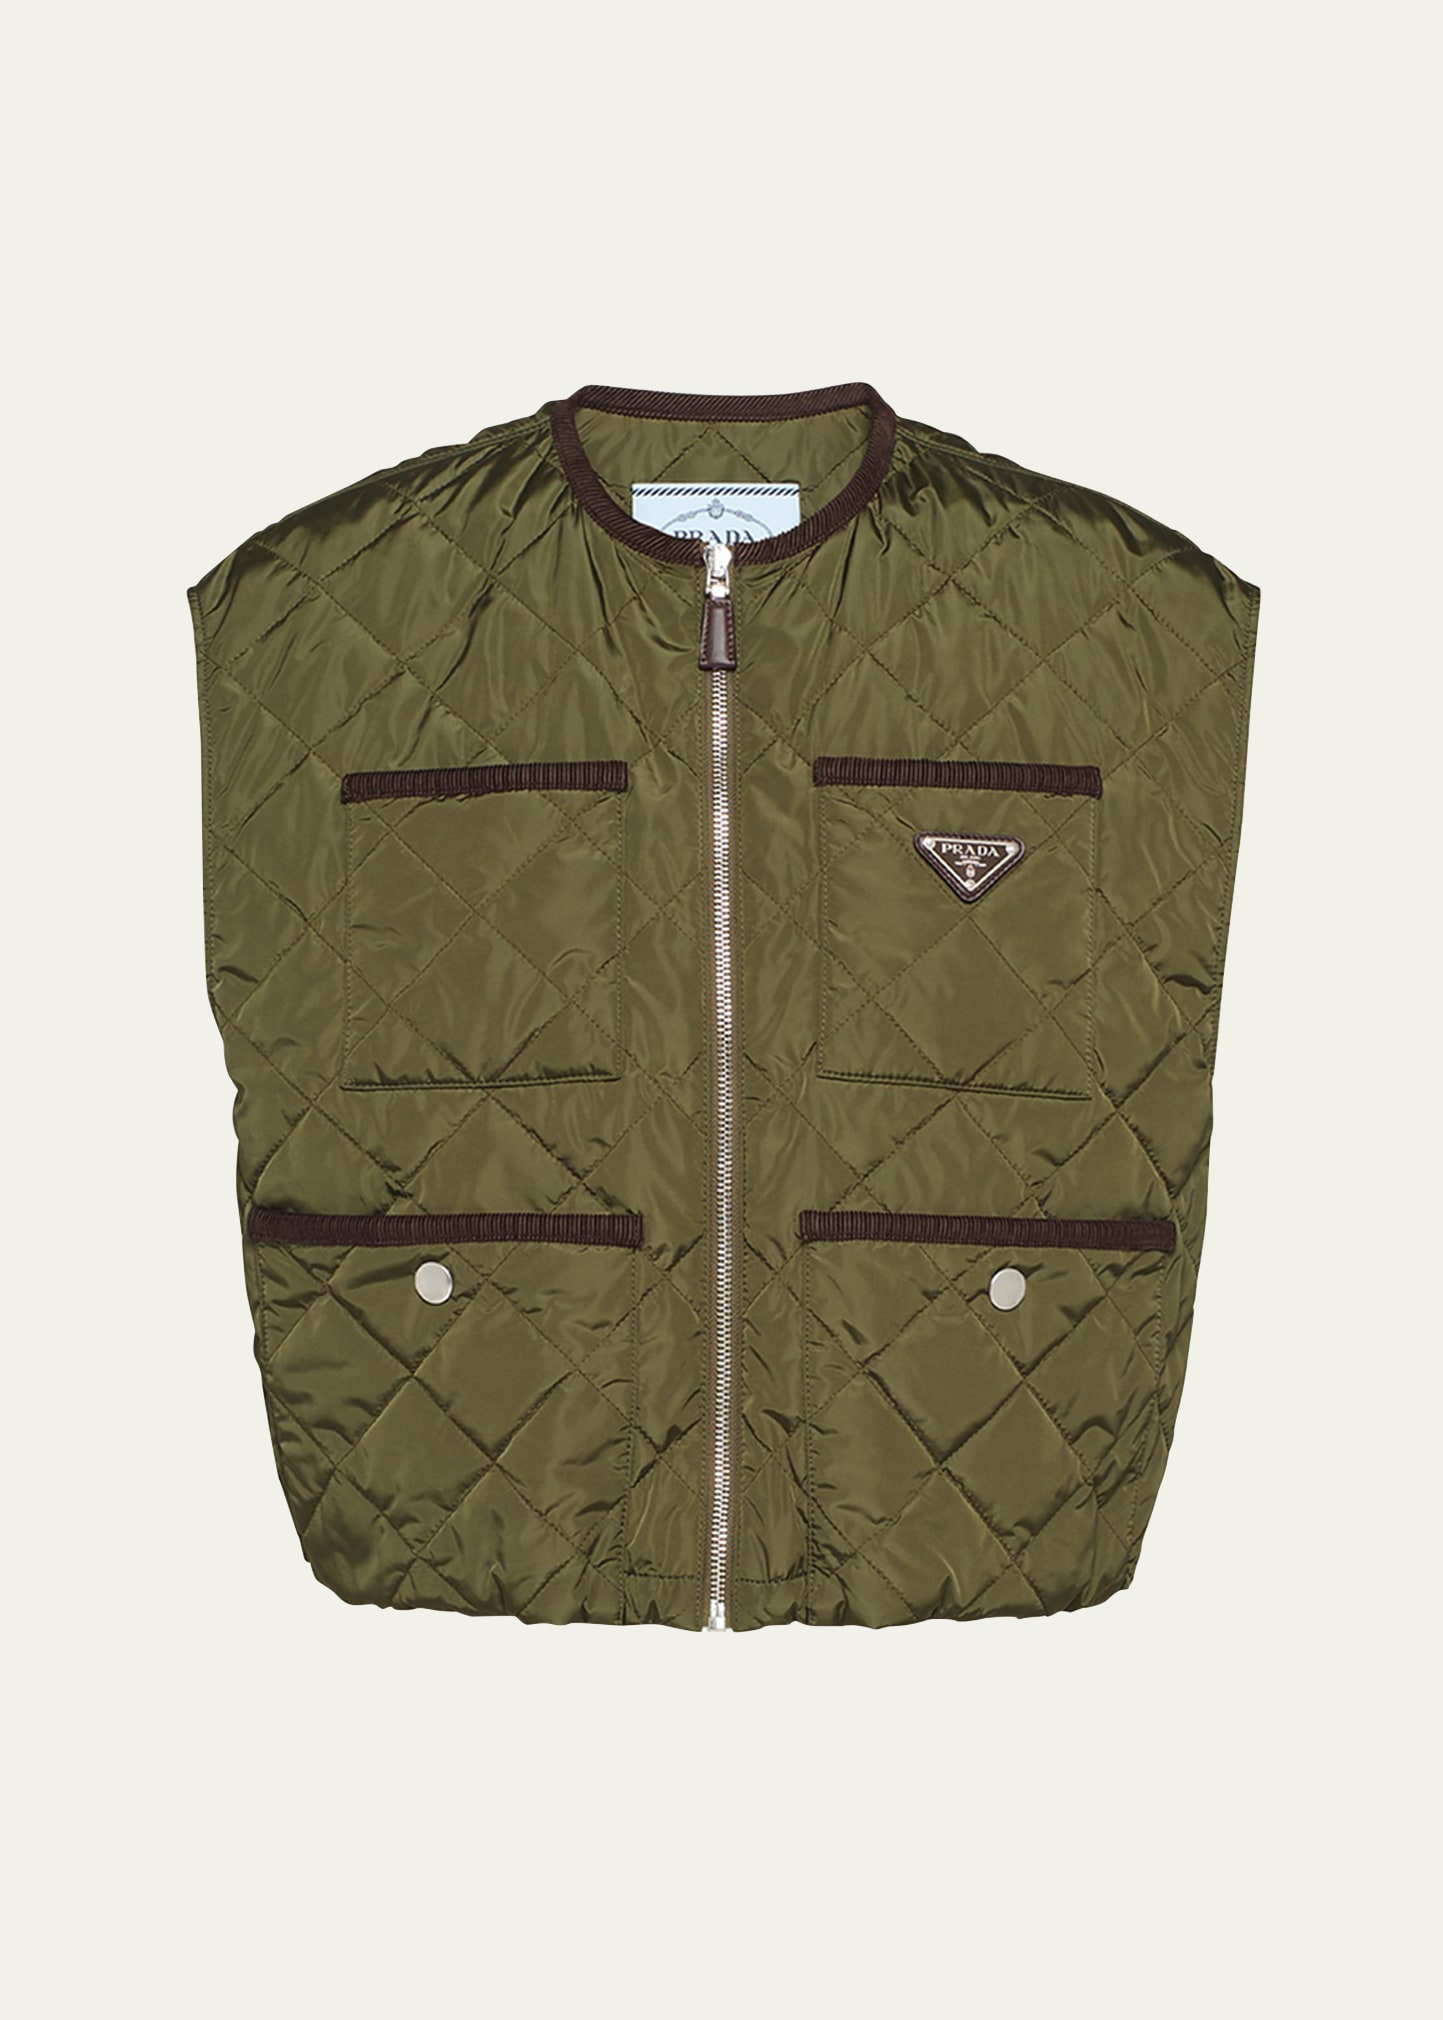 Prada Quilted Light Re-nylon Vest In Military Green